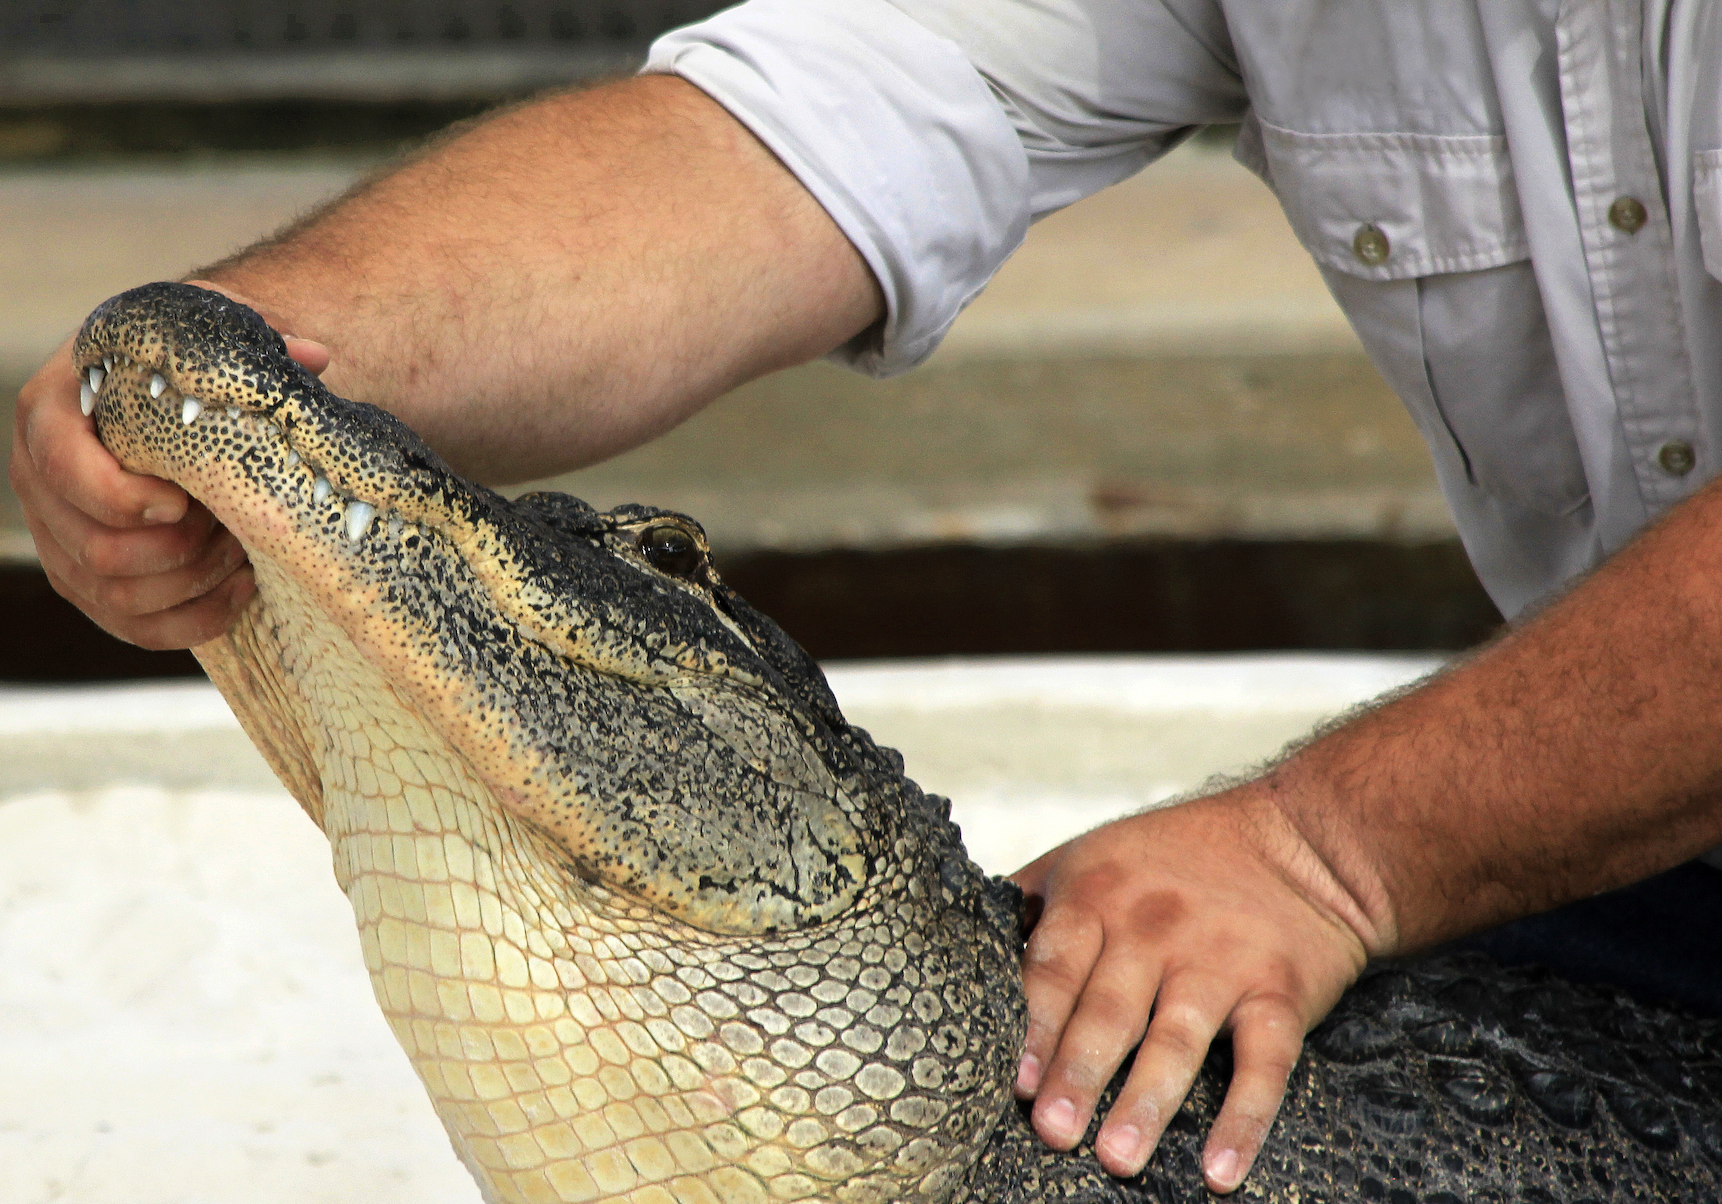 Alligator hunter holding an alligators mouth and head